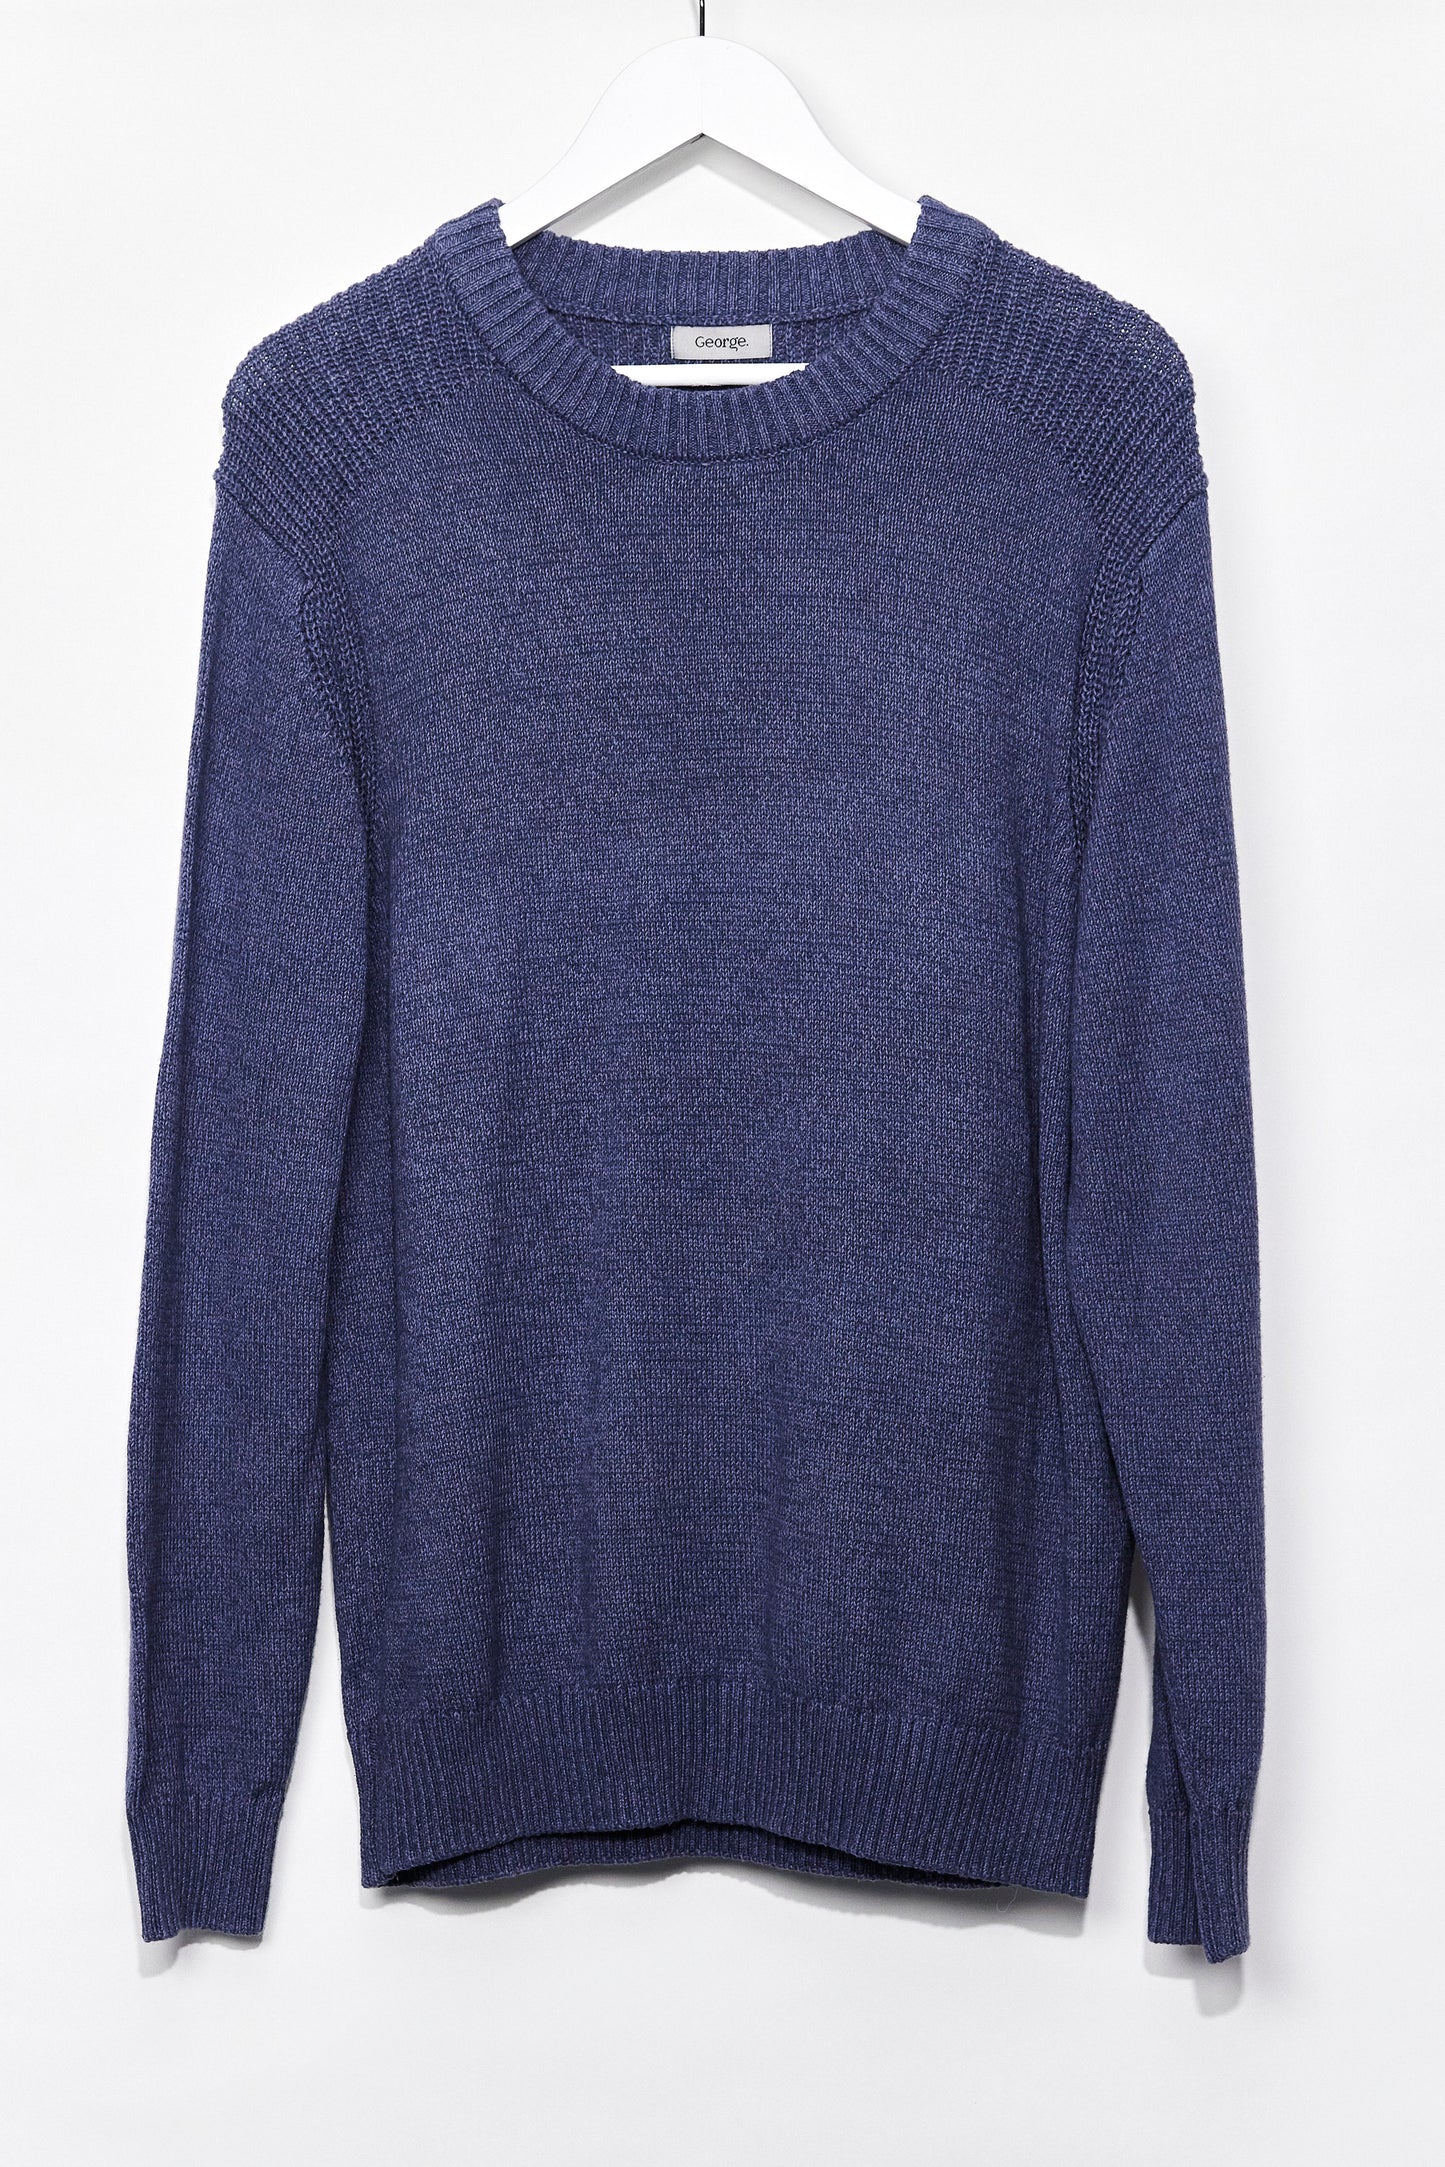 Mens George Blue Knitted jumper size Large